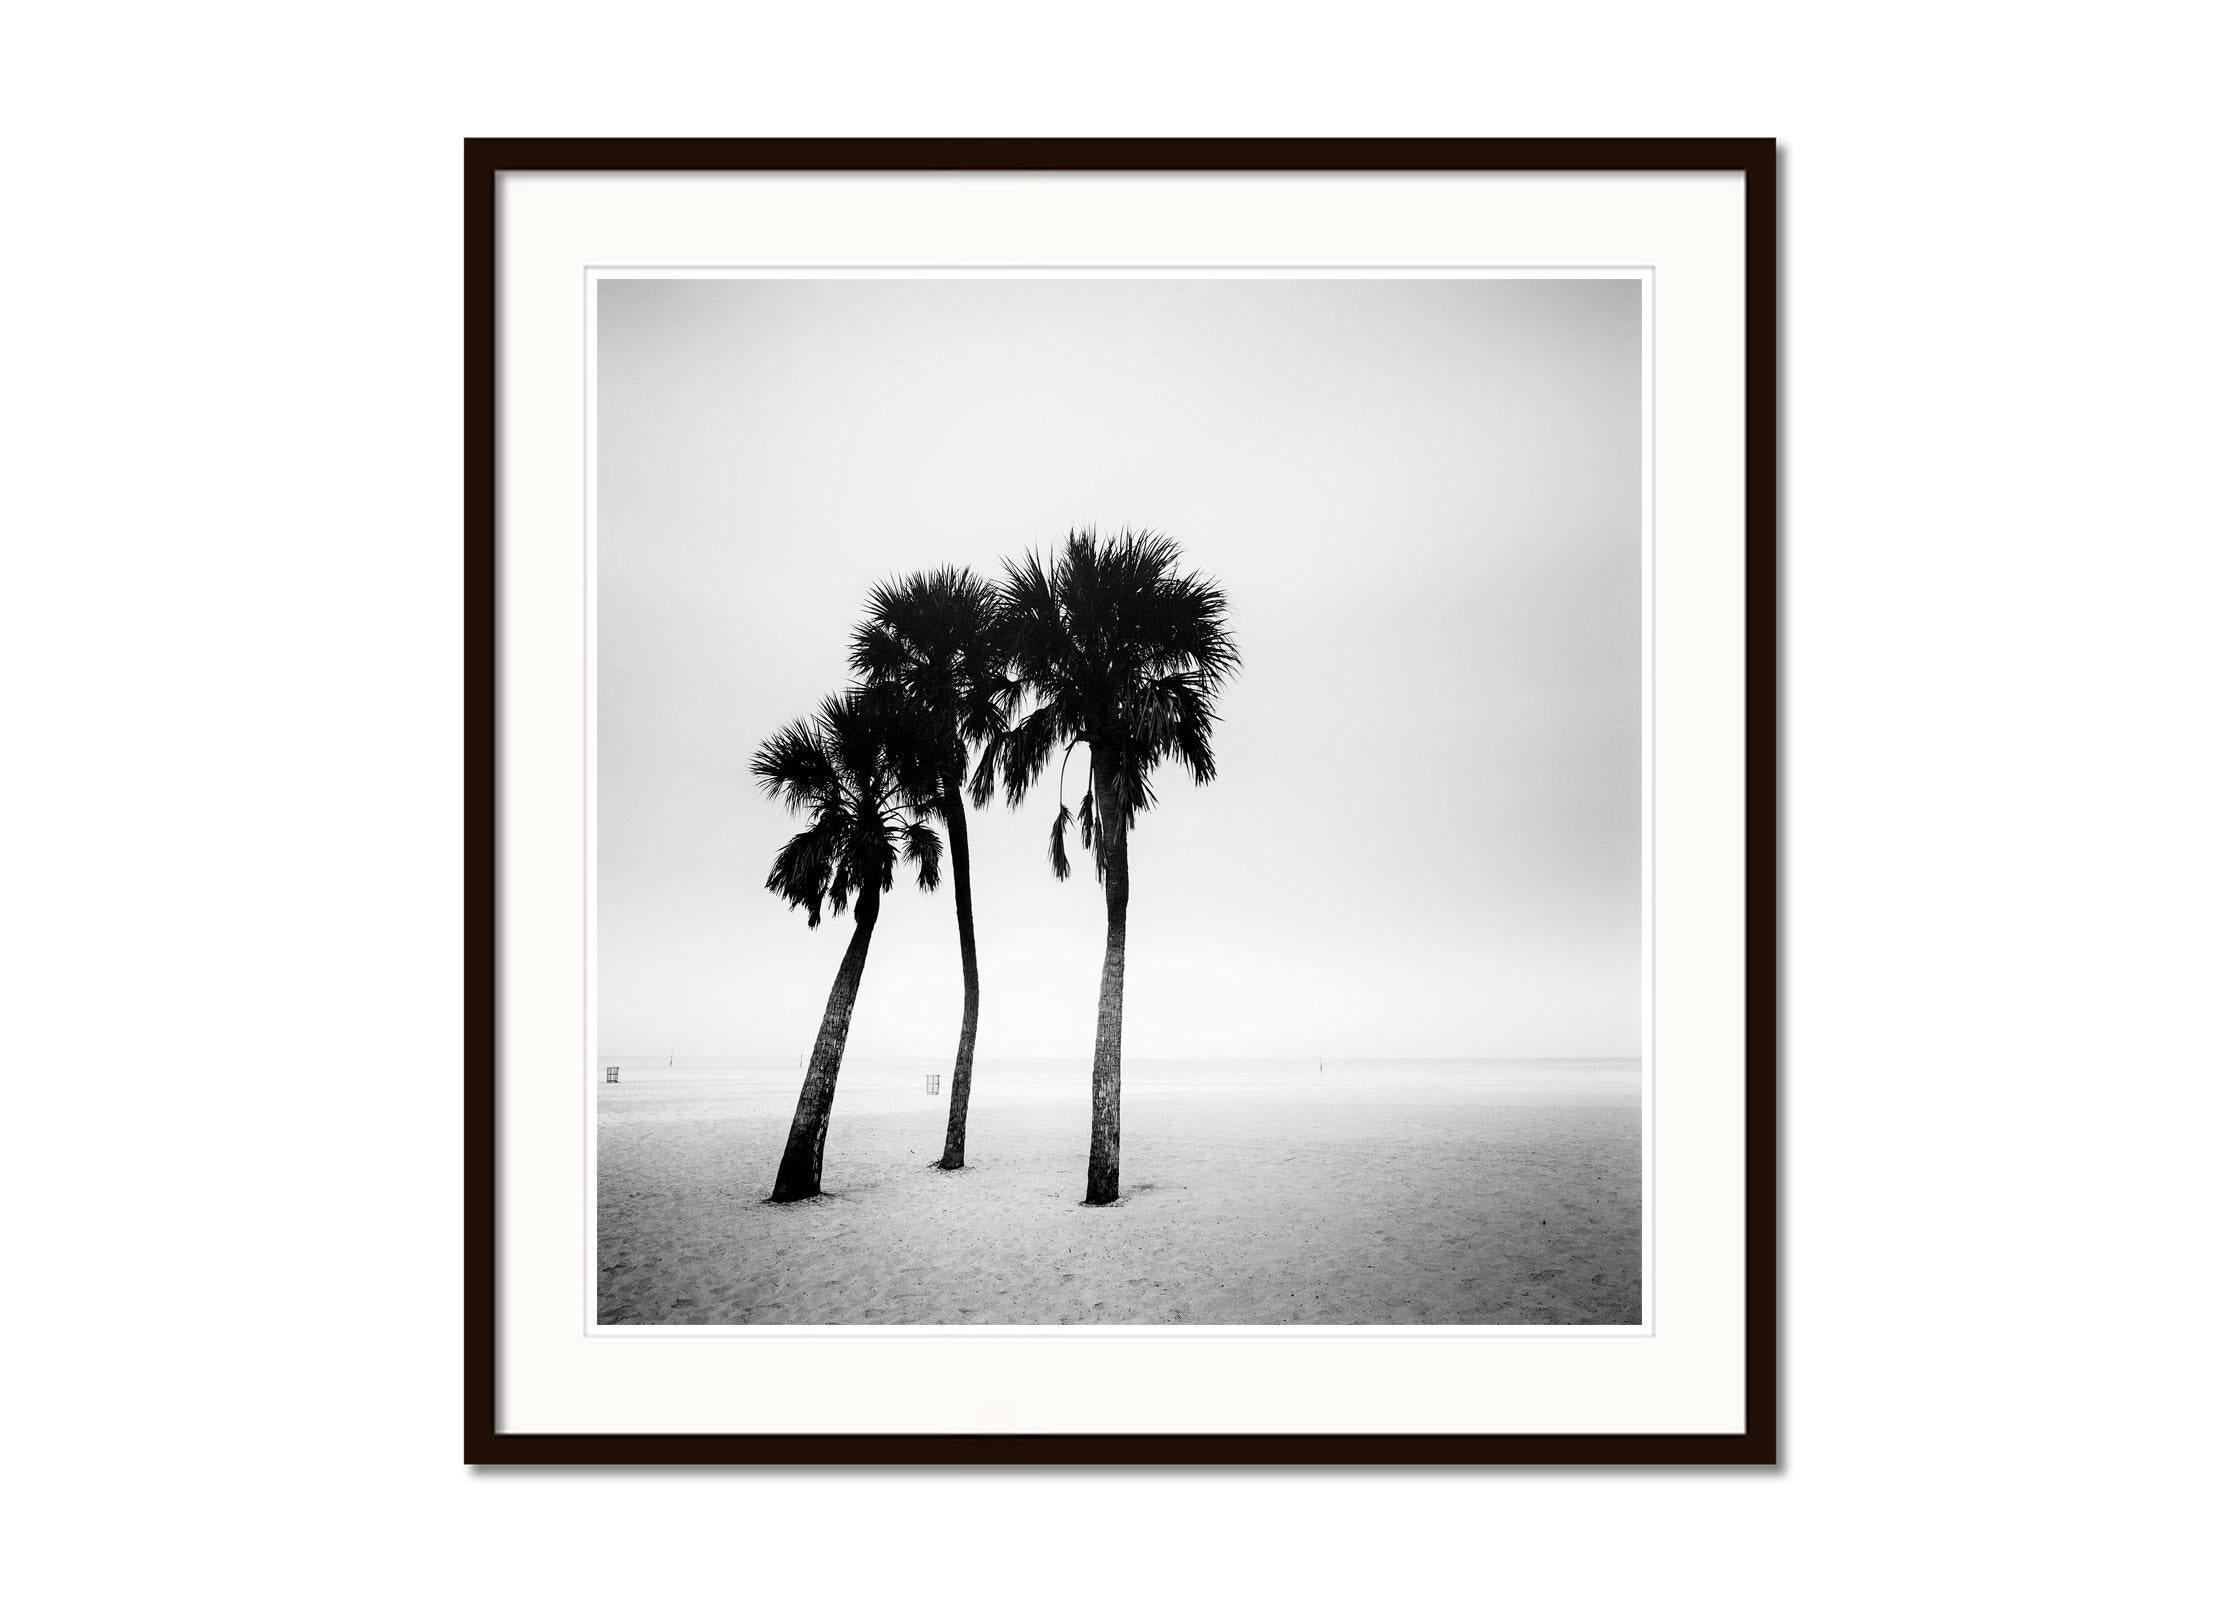 Black and white fine art landscape photography. Archival pigment ink print as part of a limited edition of 15. All Gerald Berghammer prints are made to order in limited editions on Hahnemuehle Photo Rag Baryta. Each print is stamped on the back and